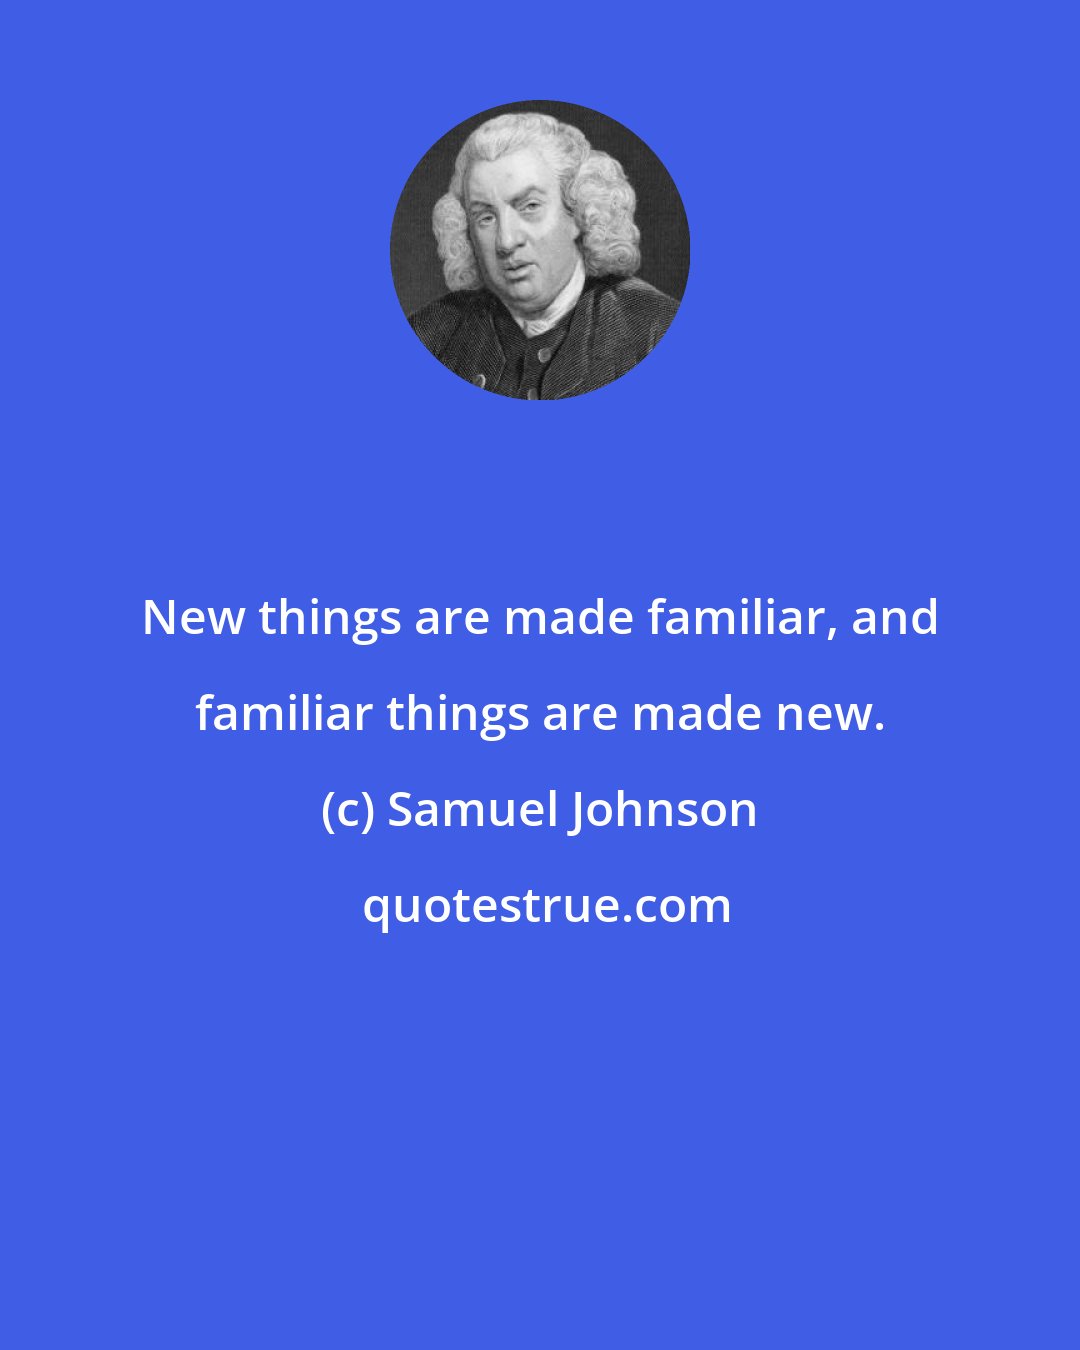 Samuel Johnson: New things are made familiar, and familiar things are made new.